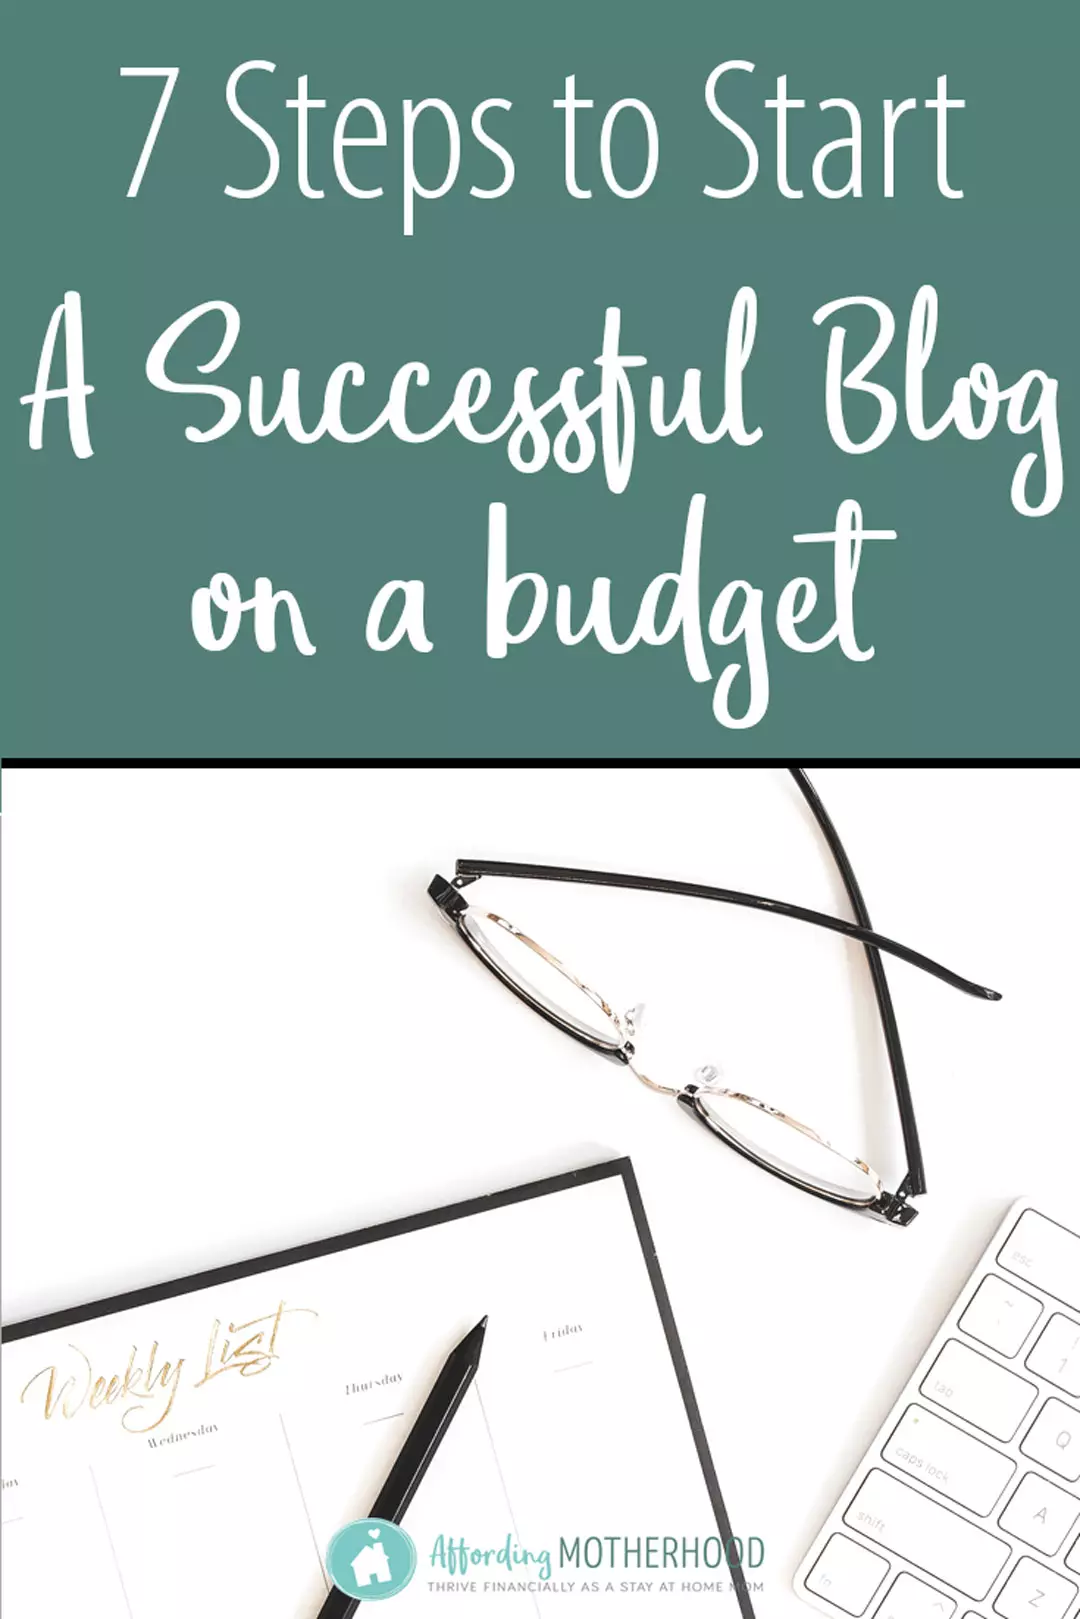 How To Start A Successful Blog Advice From A Full Time Blogger - a guide for busy moms who want to earn a part time or full time income